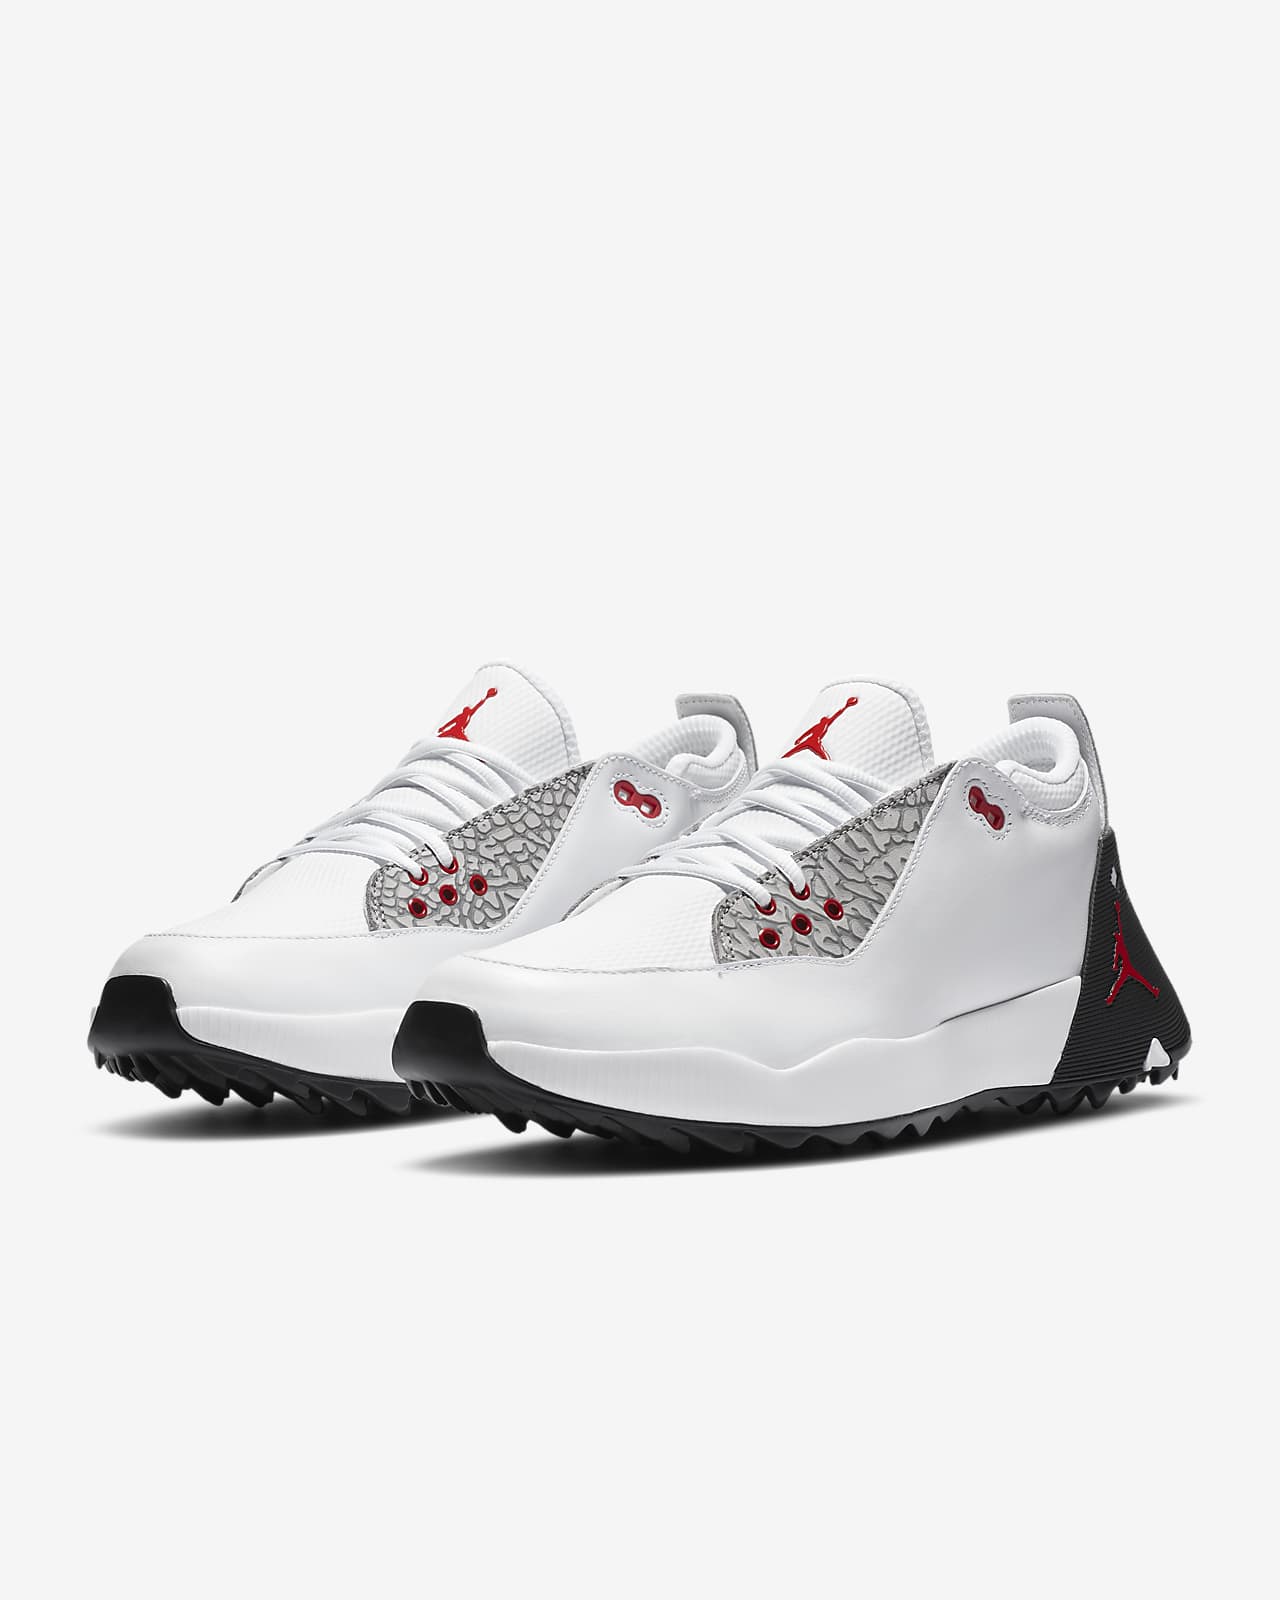 red and white nike golf shoes